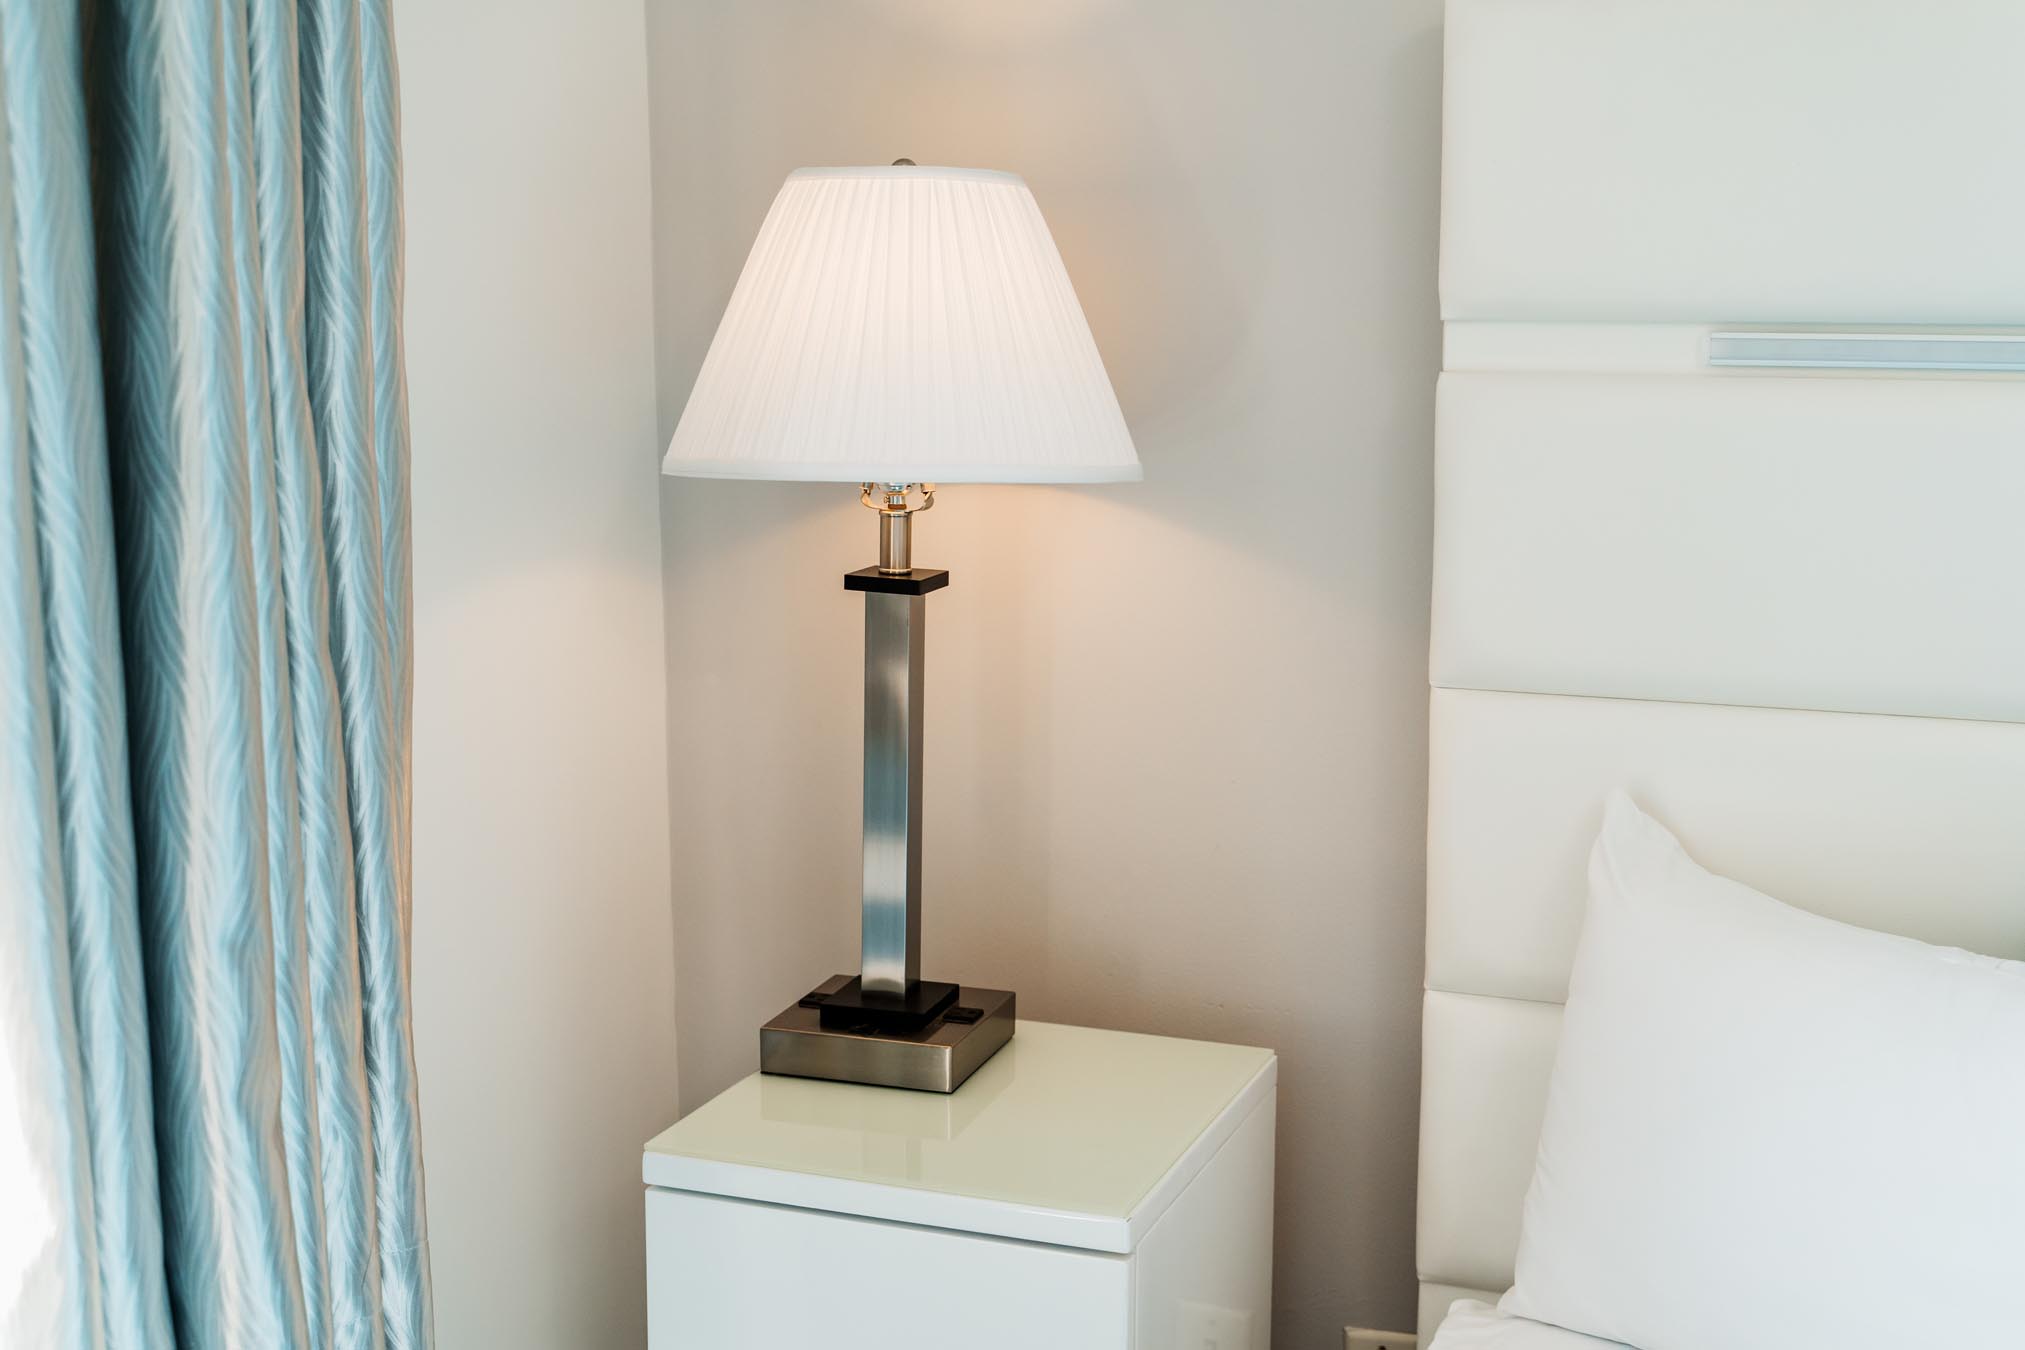 Lamp on side table